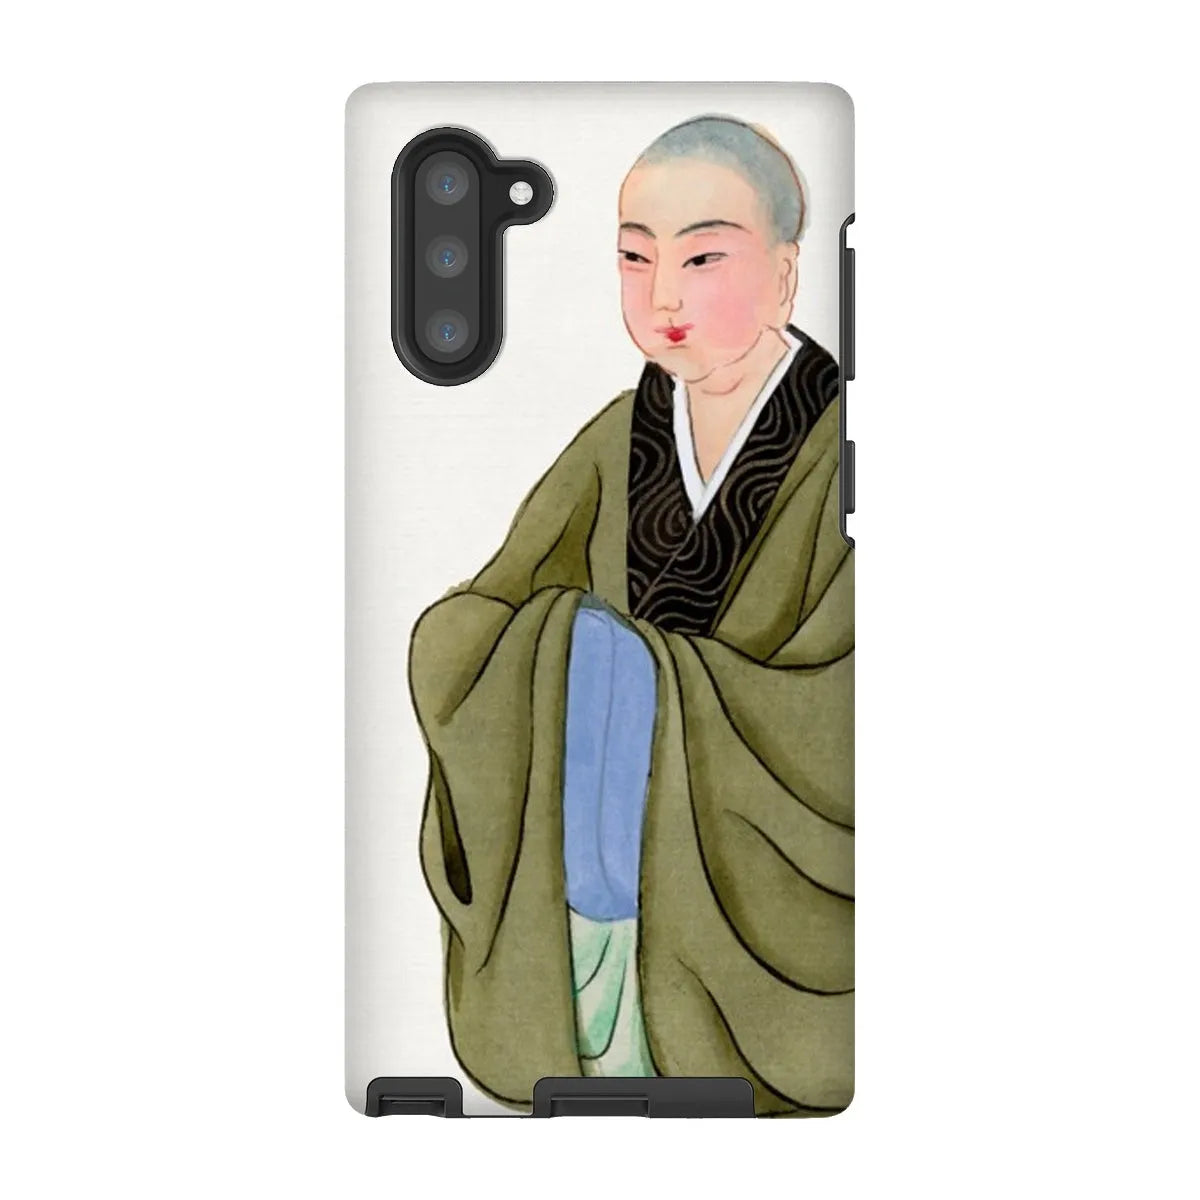 Buddhist Monk - Manchu Chinese Aesthetic Art Phone Case - Samsung Galaxy Note 10 / Matte - Mobile Phone Cases